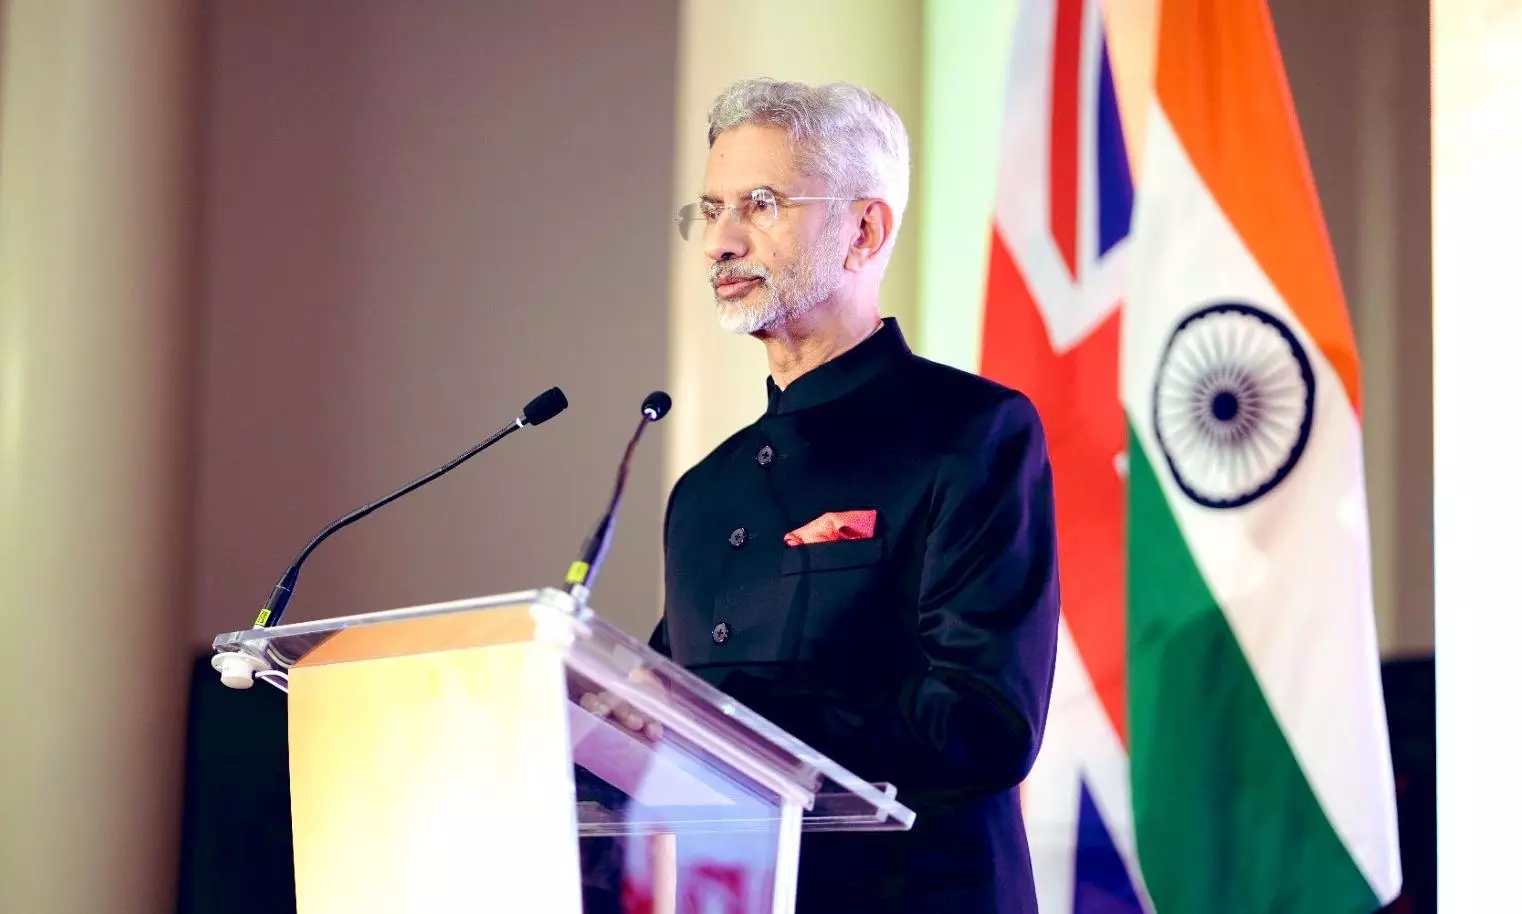 Probe panel constituted on US inputs as theyve bearing on our national security: Jaishankar